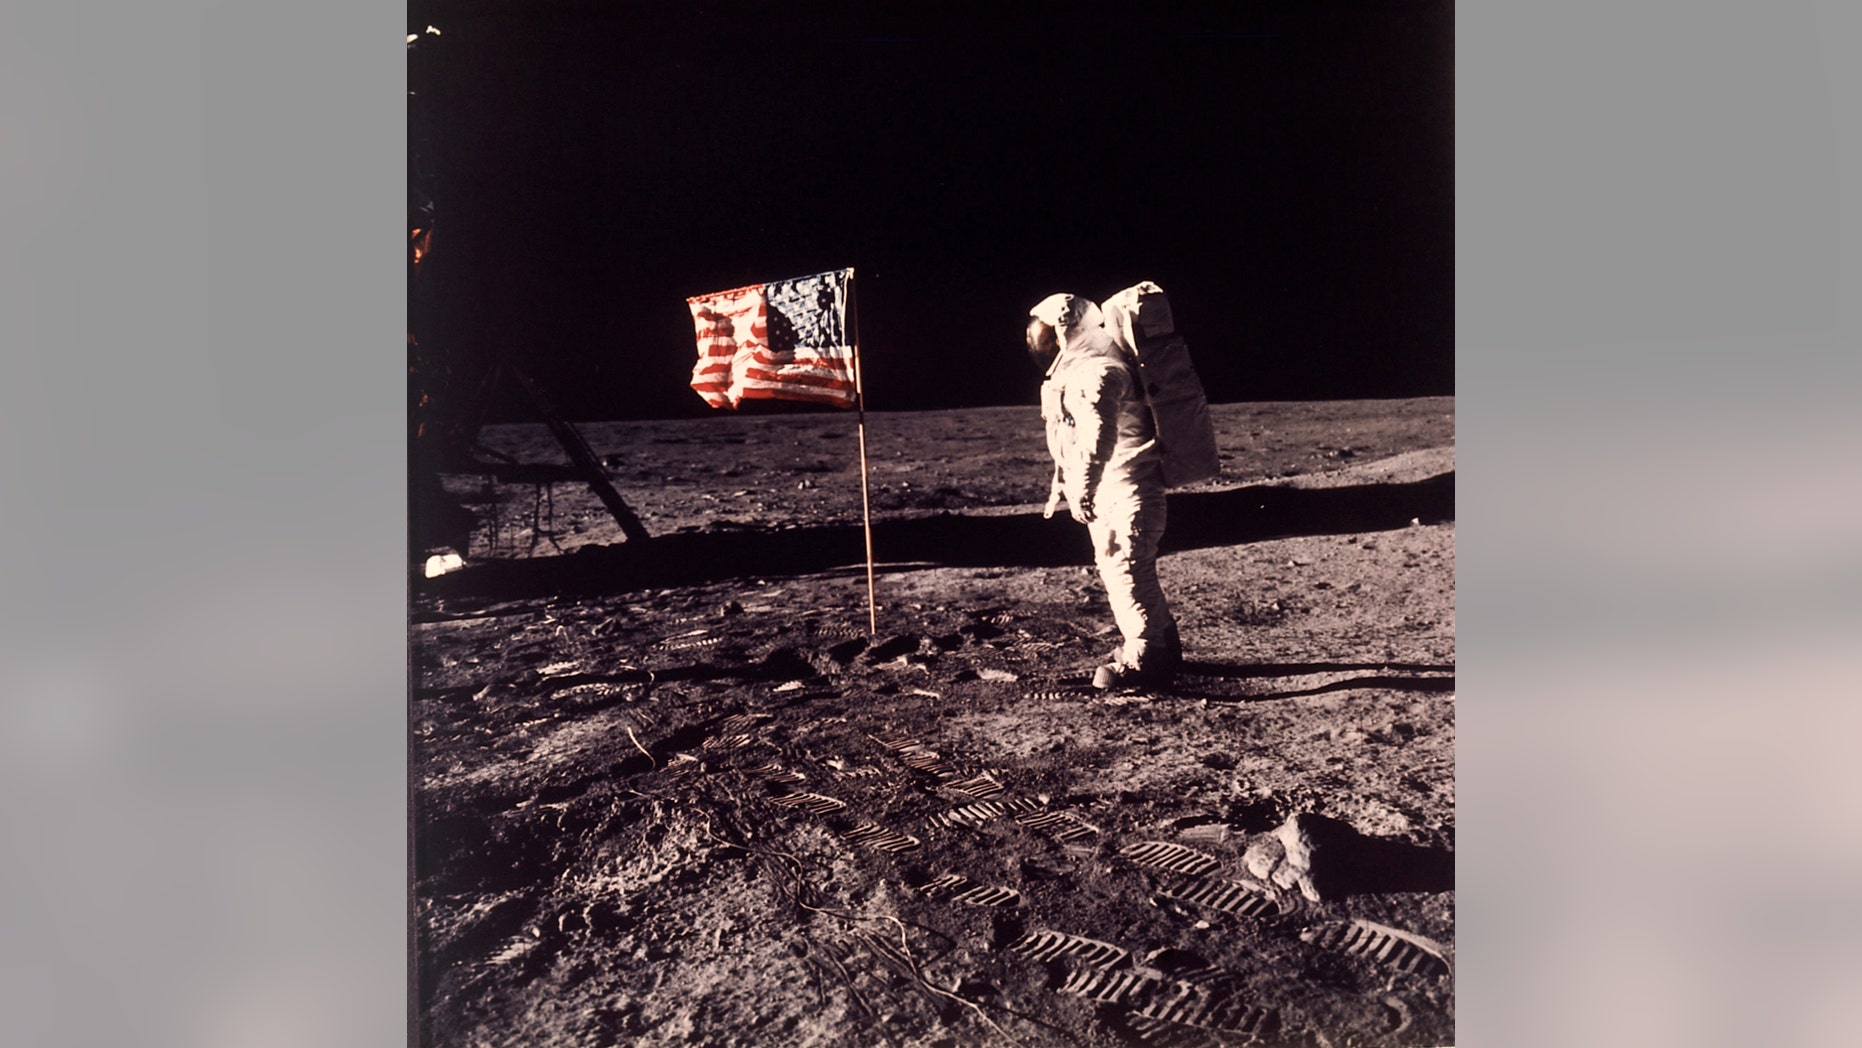 FILE - In this image provided by NASA, astronaut Buzz Aldrin poses for a photograph beside the U.S. flag deployed on the moon during the Apollo 11 mission on July 20, 1969. A new poll shows most Americans prefer focusing on potential asteroid impacts over a return to the moon. The survey by The Associated Press and the NORC Center for Public Affairs Research was released Thursday, June 20, one month before the 50th anniversary of Neil Armstrong and Aldrinâ€™s momentous lunar landing. (Neil A. Armstrong/NASA via AP)